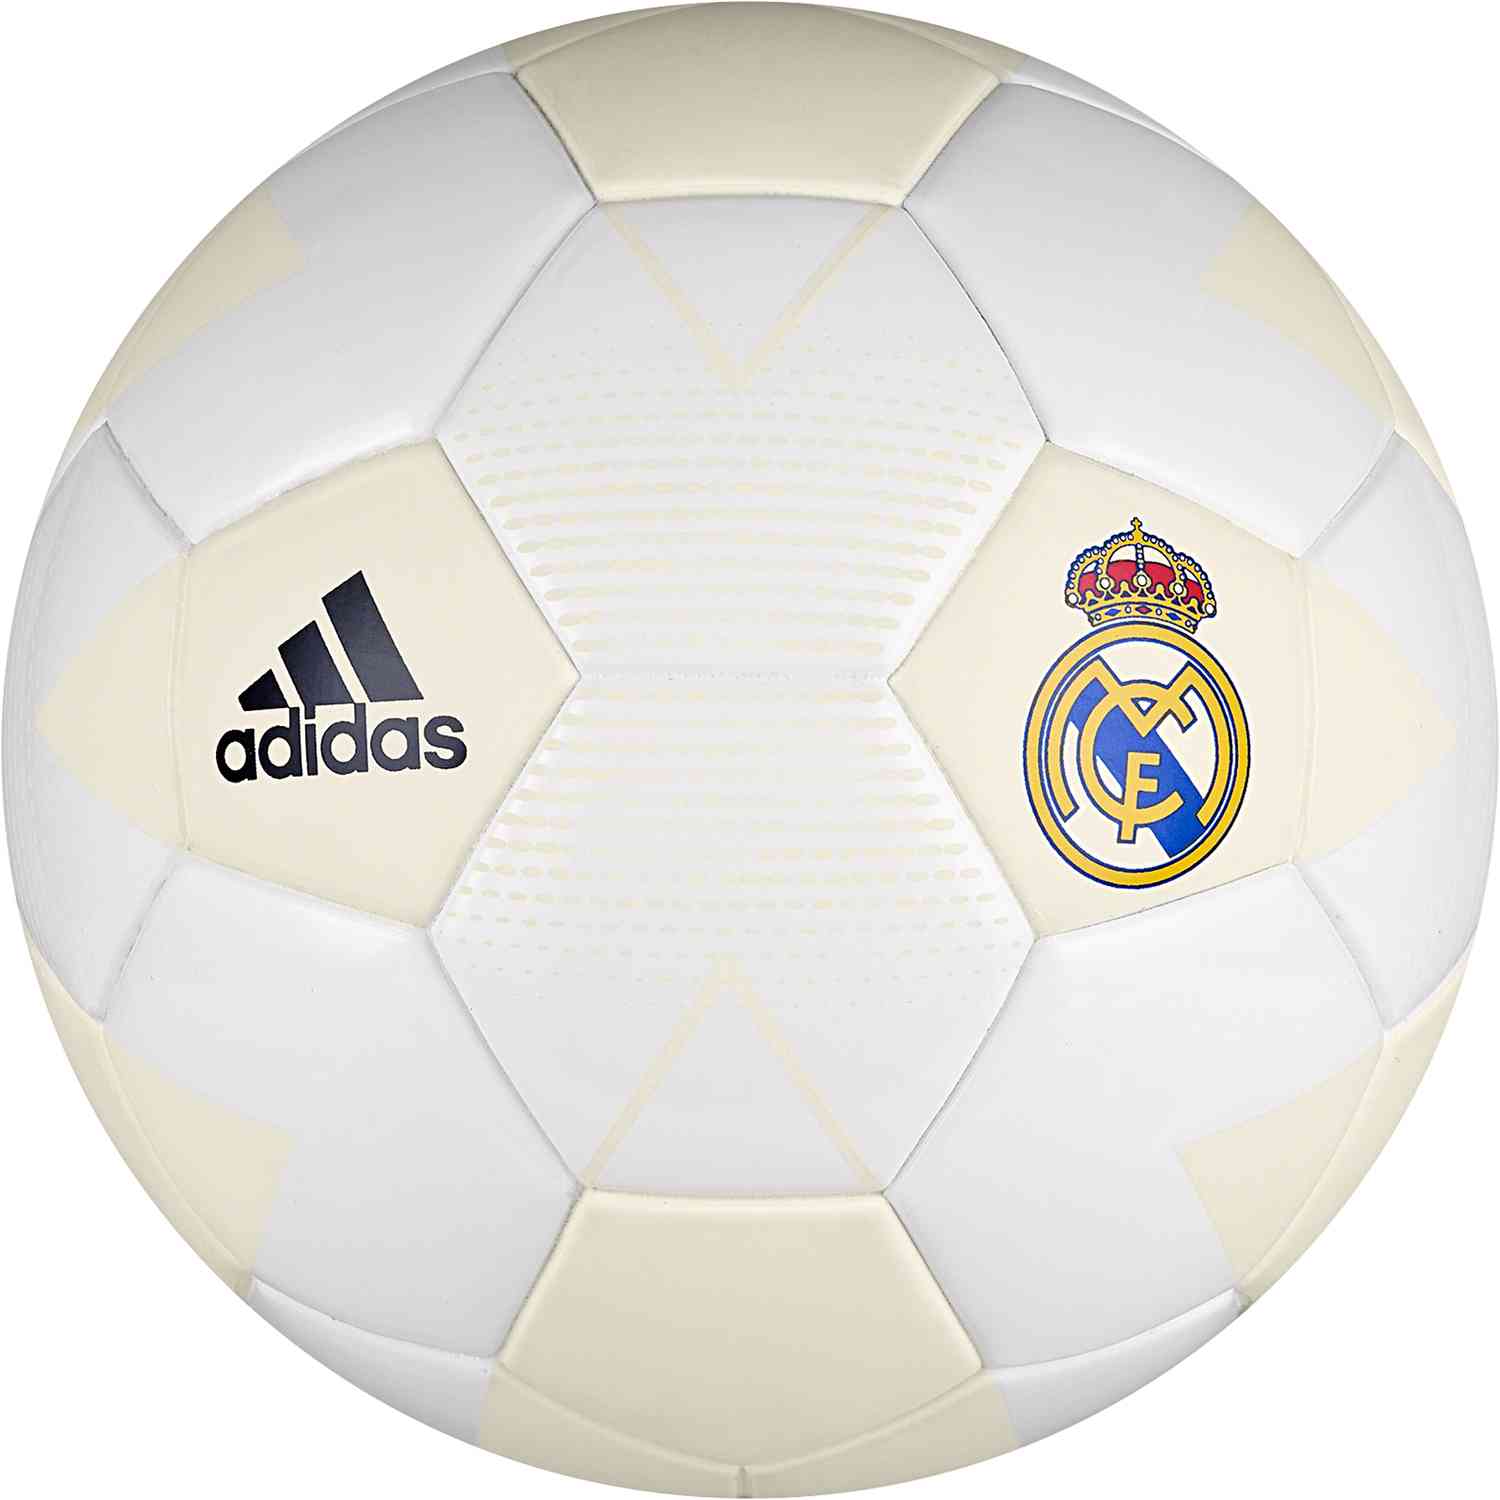 REAL MADRID SOCCER BALL SIZE 5 HOME Colors SHIPS INFLATED Ronaldo Low Price!!!!